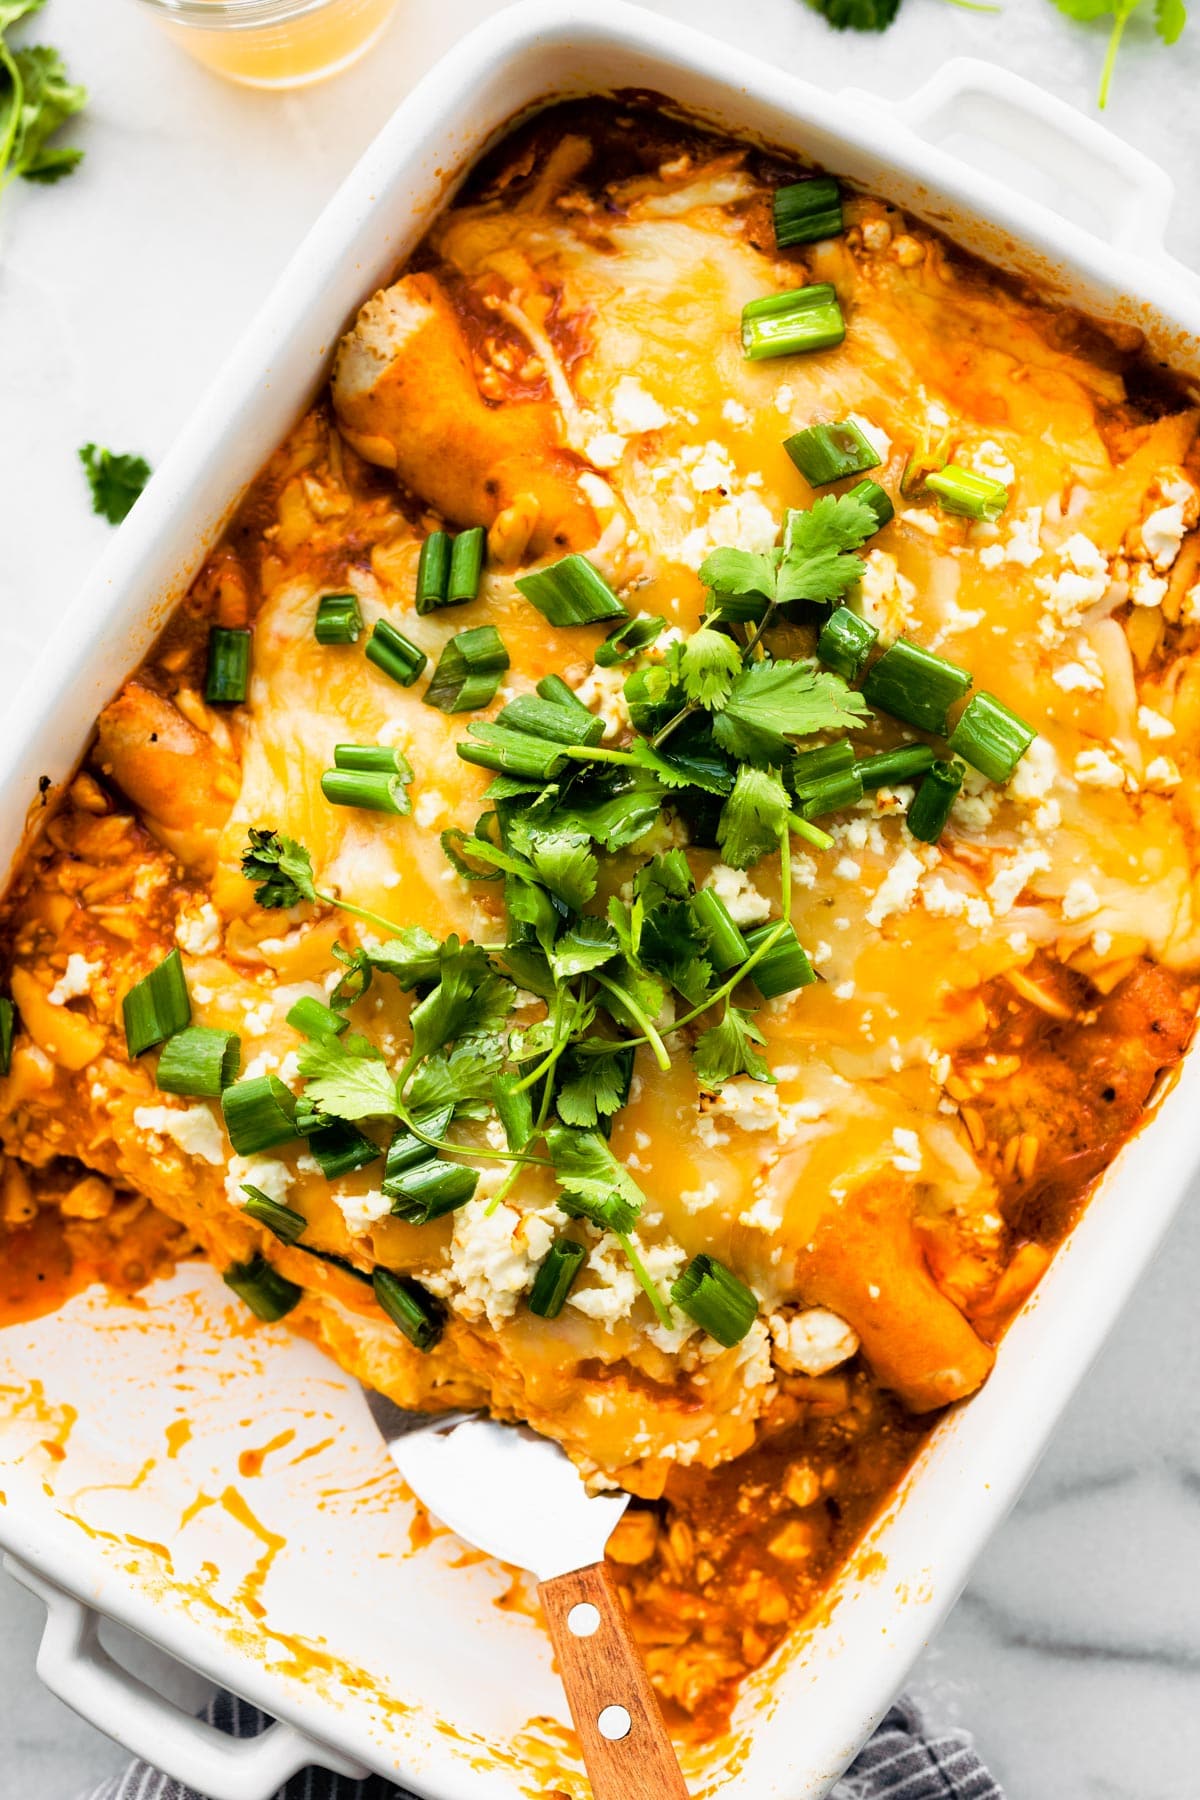 spicy Mexican casserole made with pantry staples